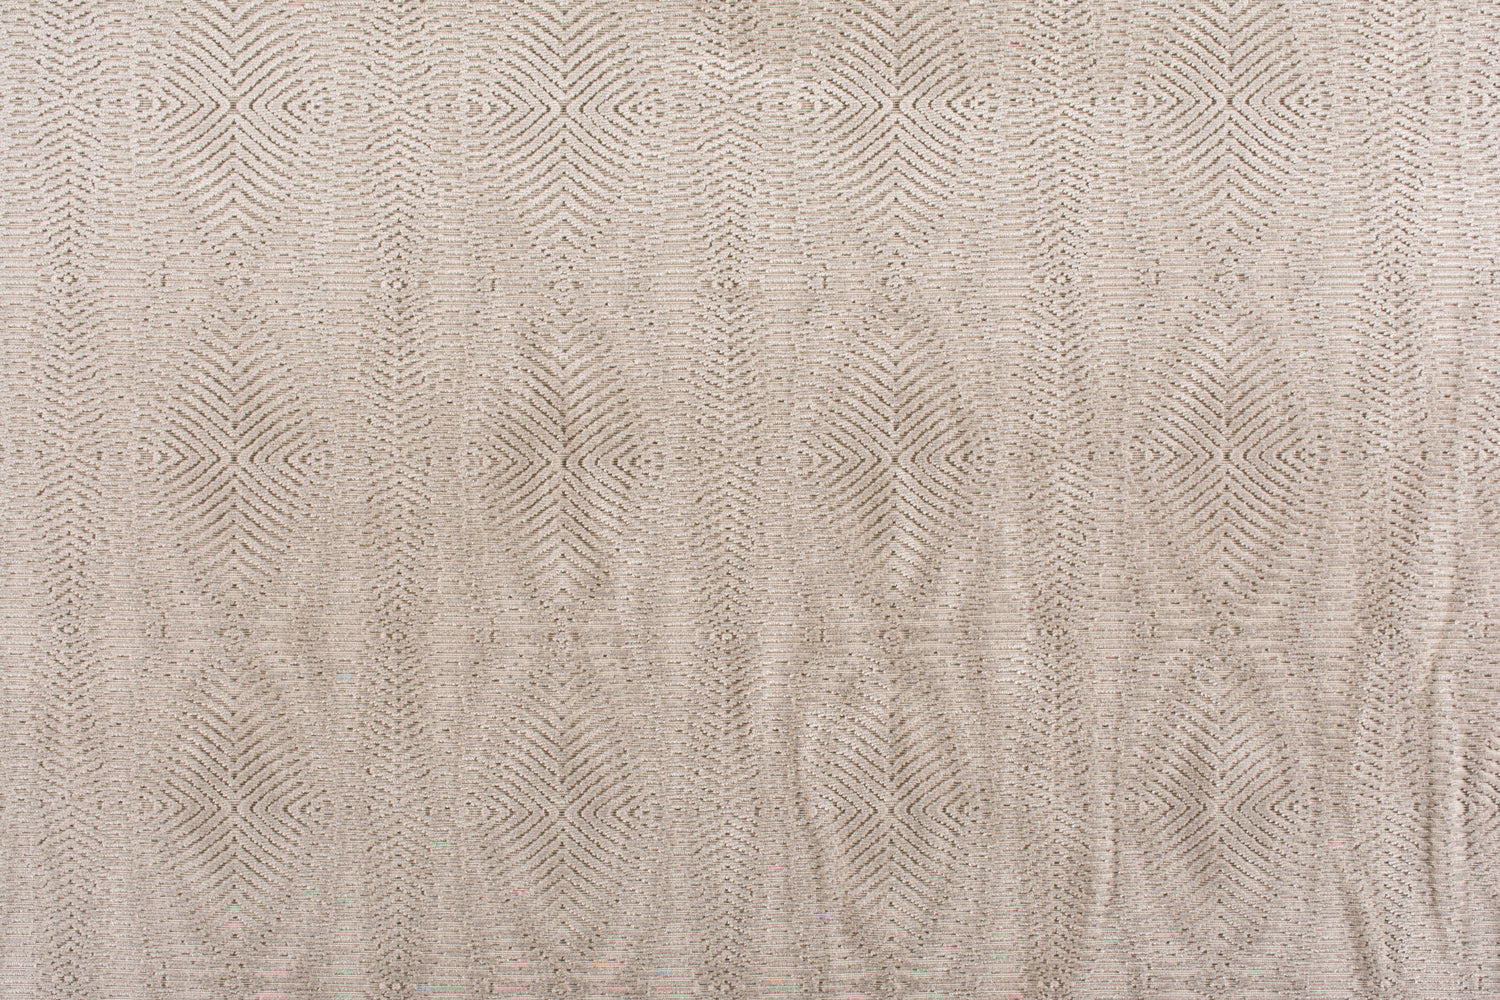 Cava fabric in grey smoke color - pattern number V4 00024020 - by Scalamandre in the Old World Weavers collection